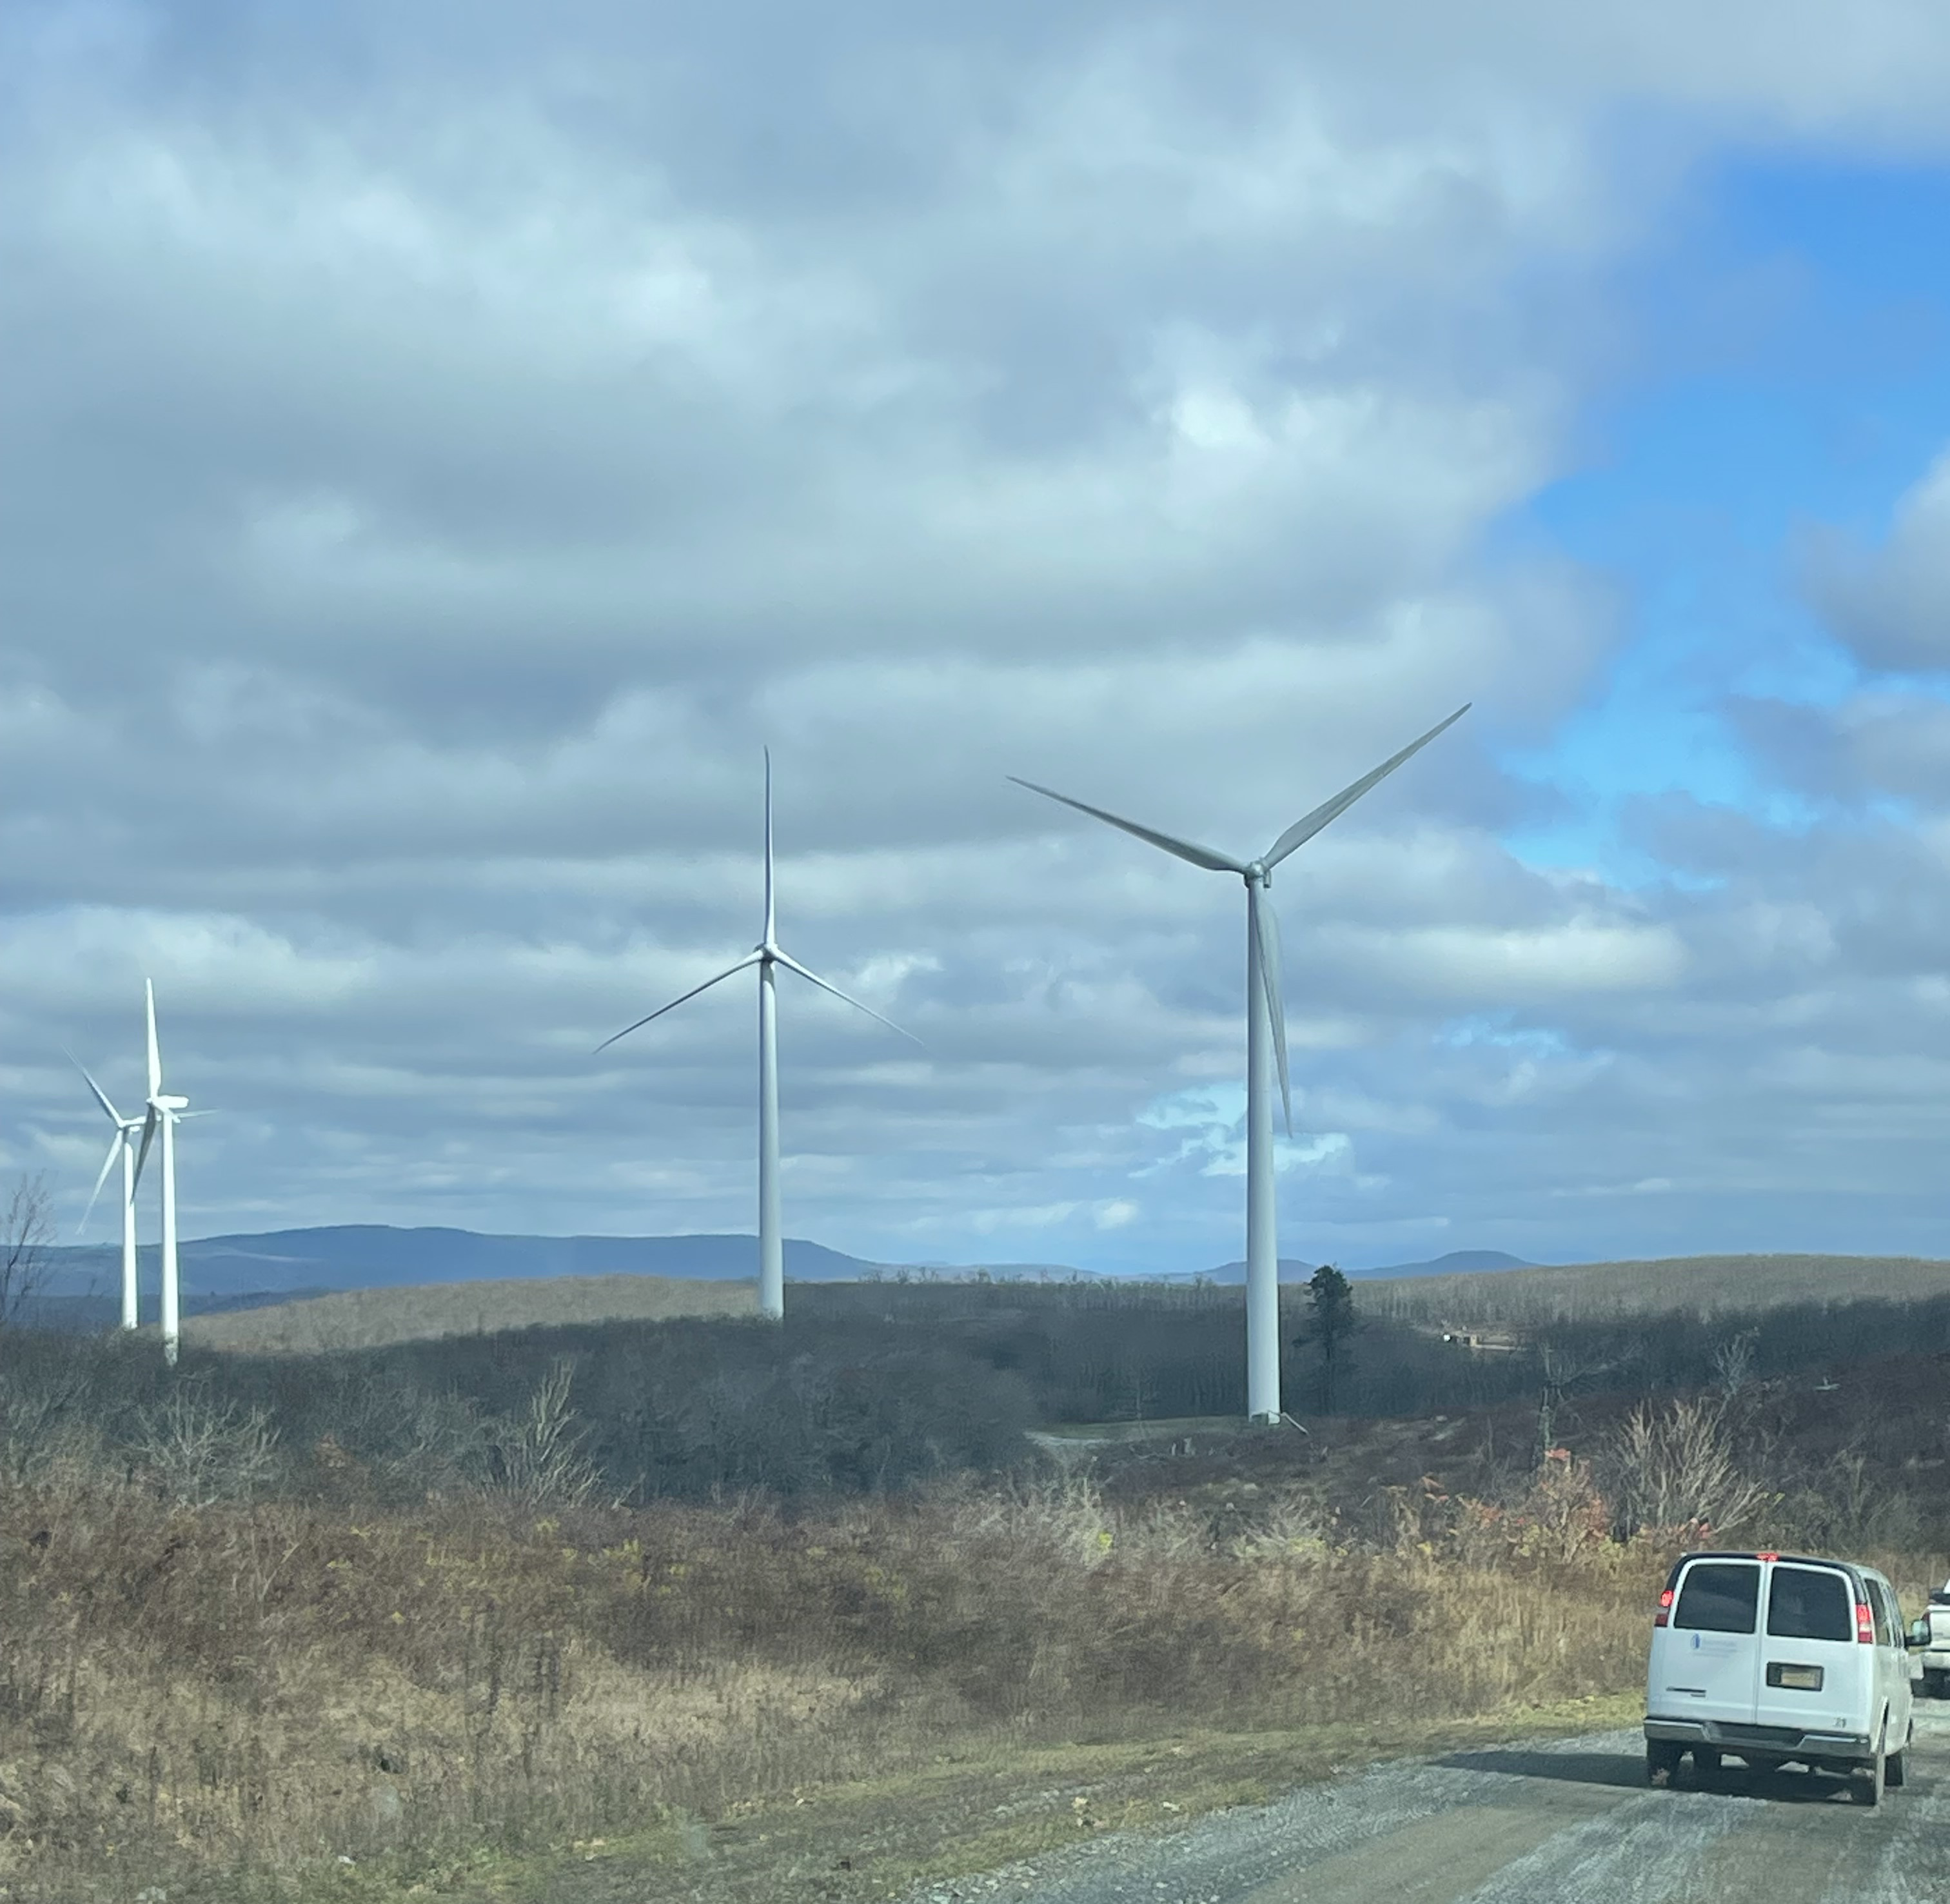 Image of wind turbines that were part of the tour route, which demonstrates how our land is used for forestry, energy, natural resources and recreation.